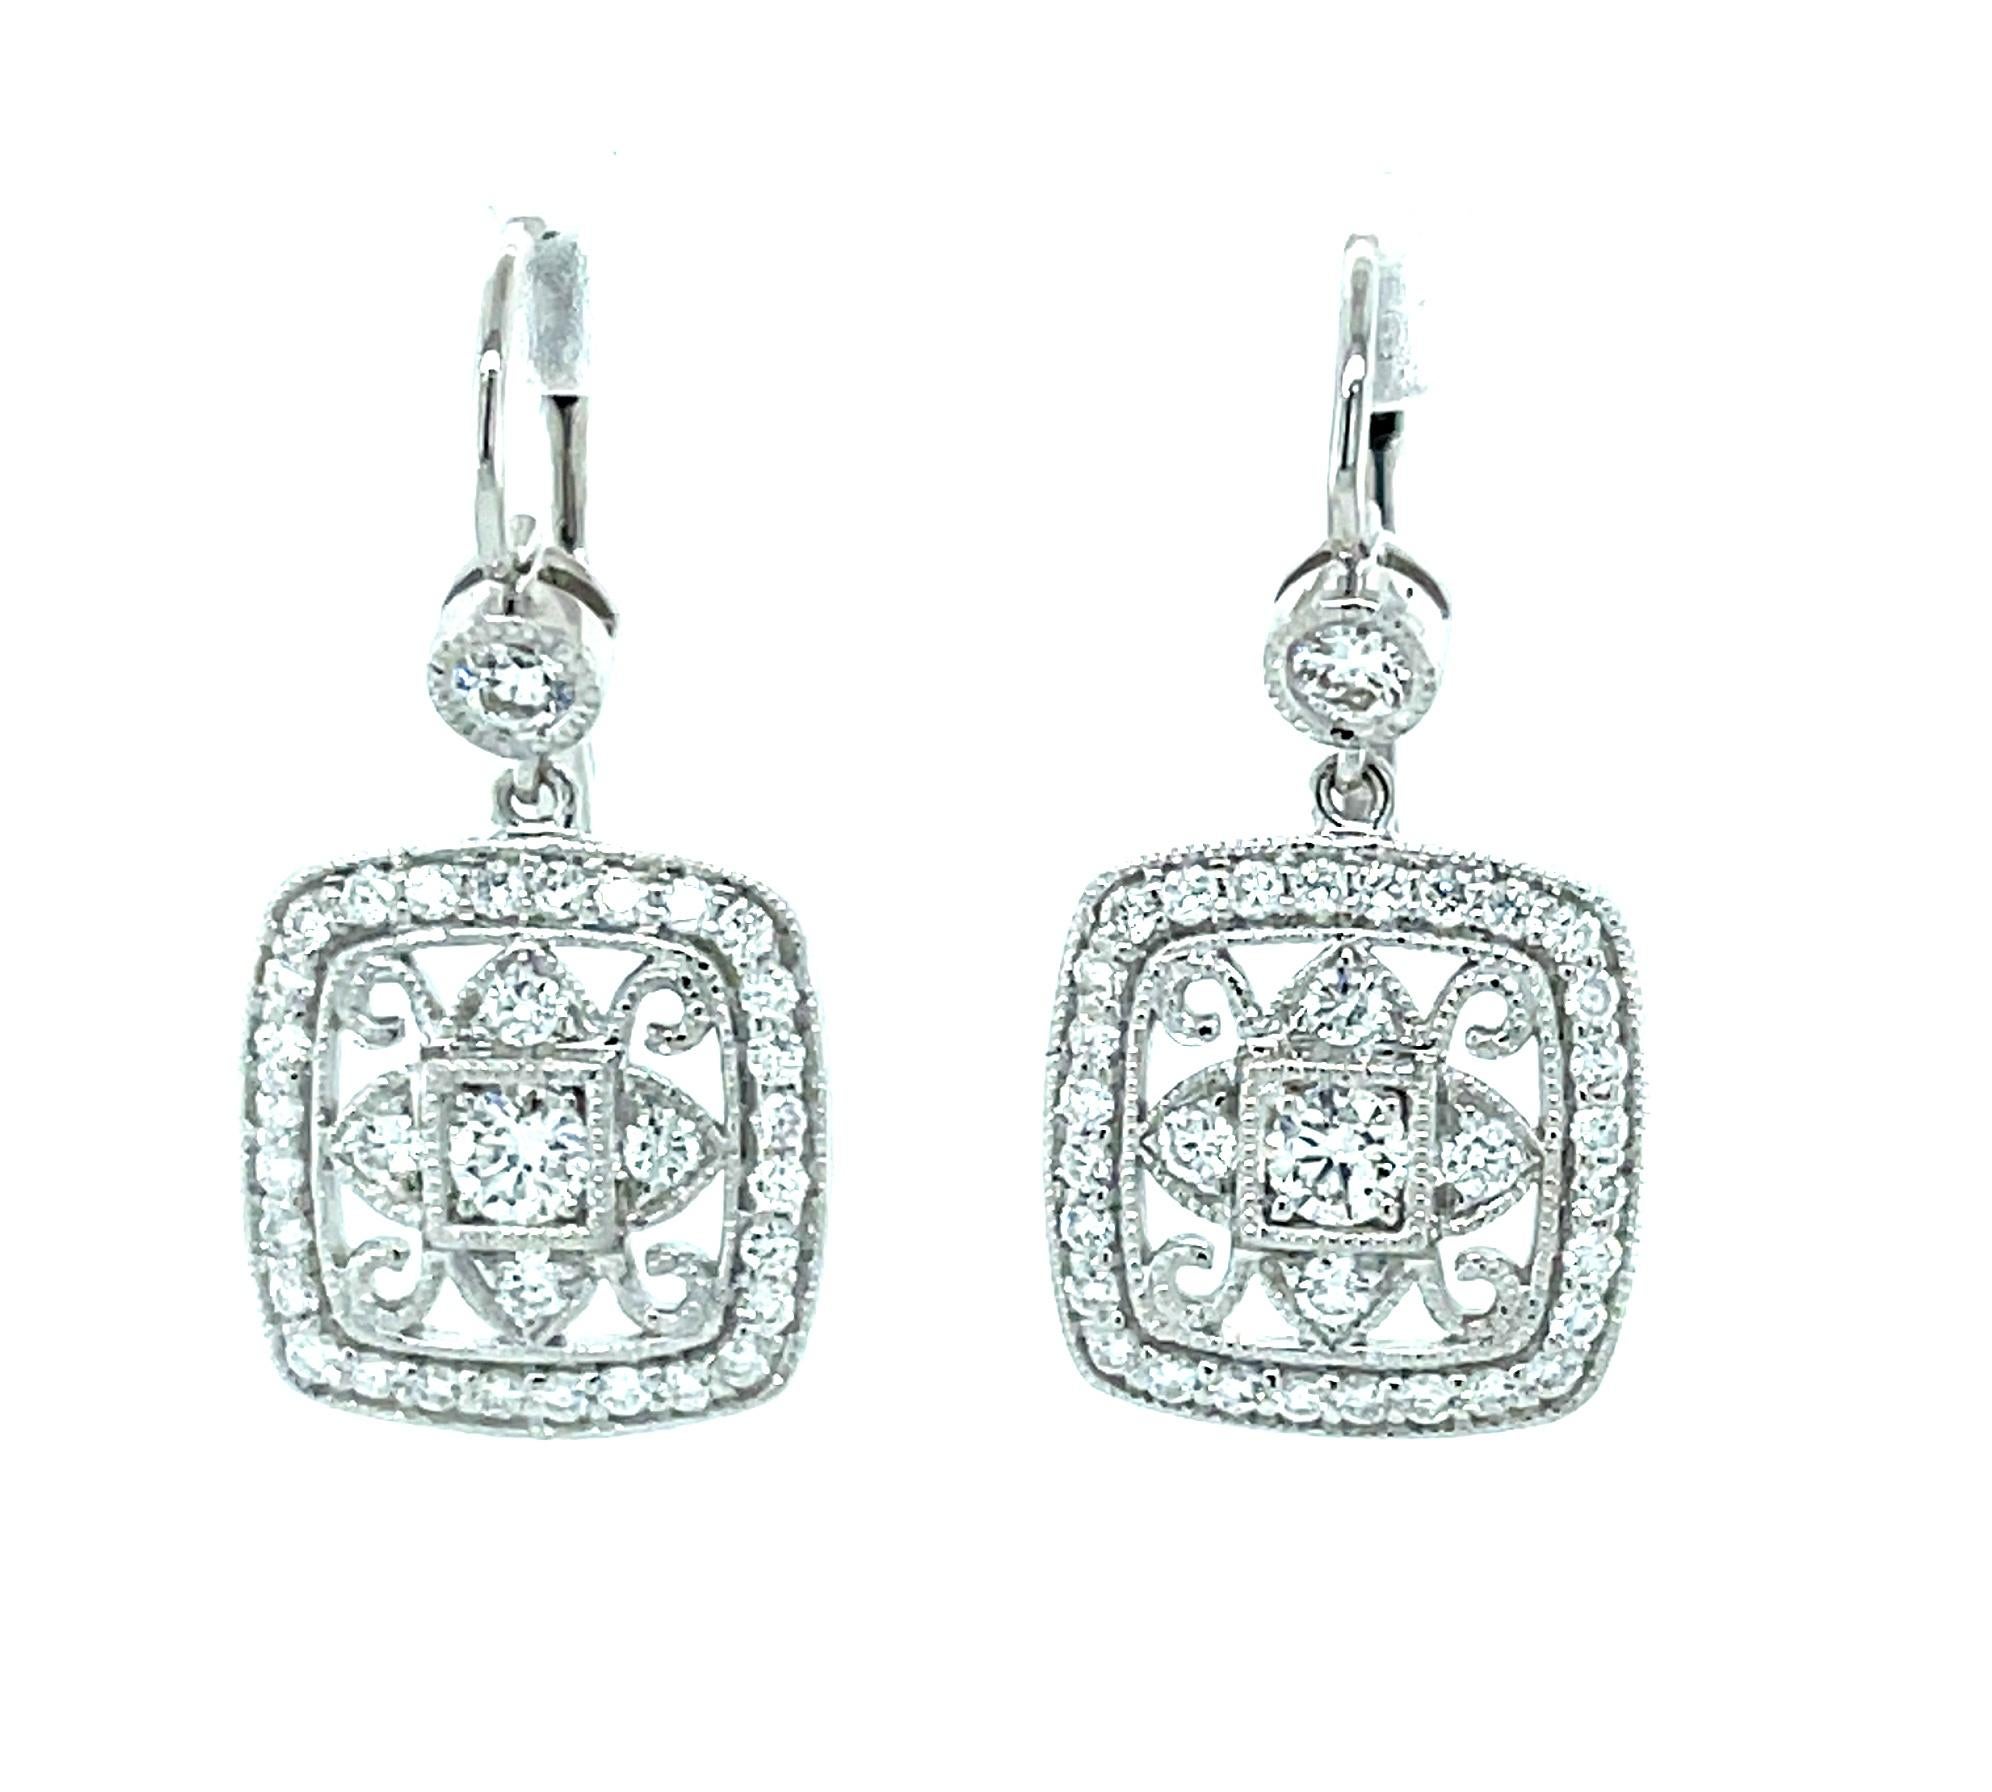 Stunning geometric lines and delicate curves form the eye-catching shape of these gorgeous 18 karat white gold  earrings. Round brilliant-cut white diamonds sparkle throughout the intricate design, drawing attention to masterful craftsmanship and